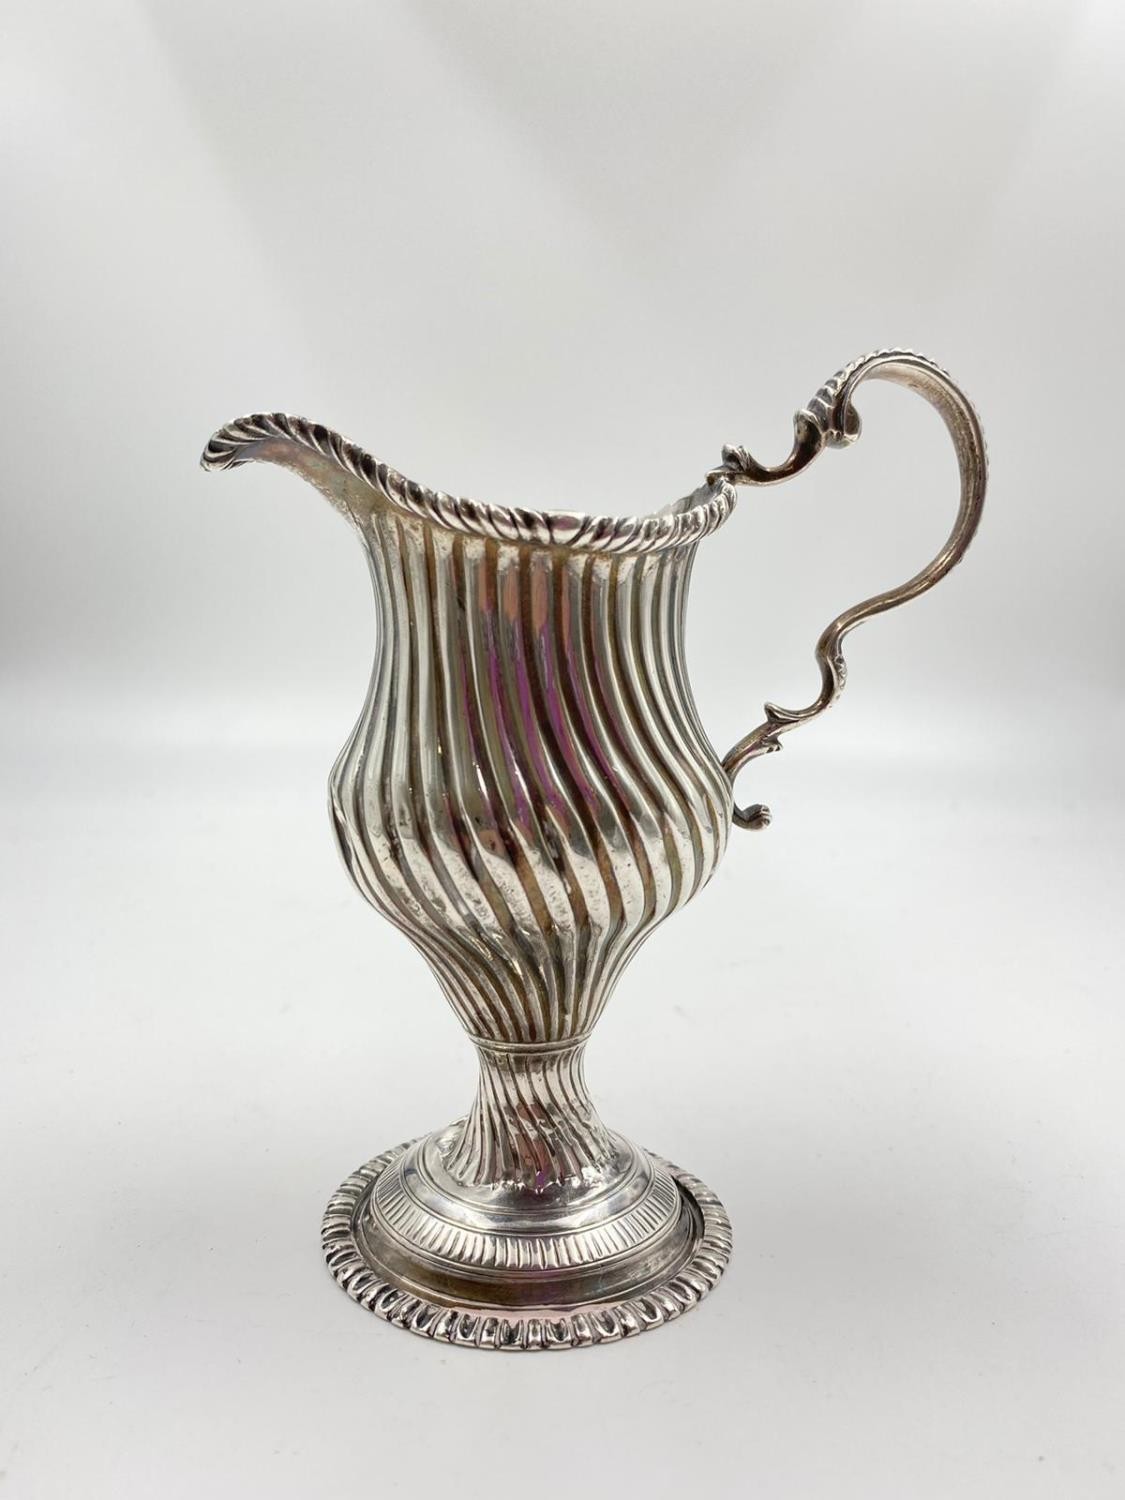 A finely detailed silver creamer in ribbed swirl pattern with curved handle on a pedestal base. 14cm